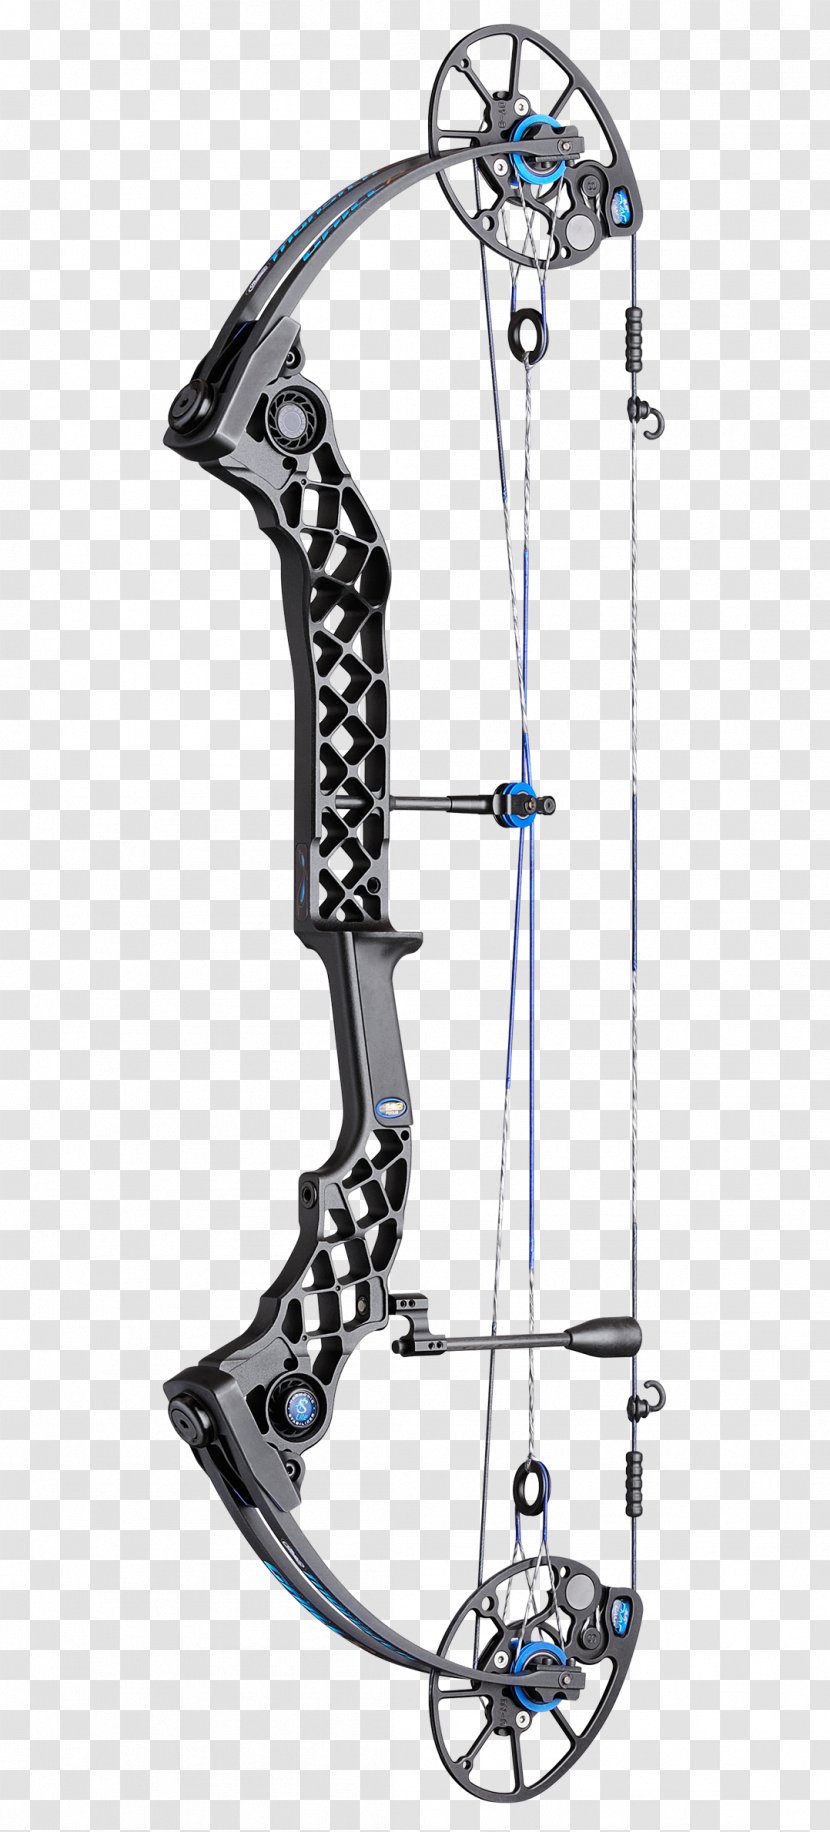 Compound Bows PSE Archery Bow And Arrow Hunting - Deer - R60 Transparent PNG